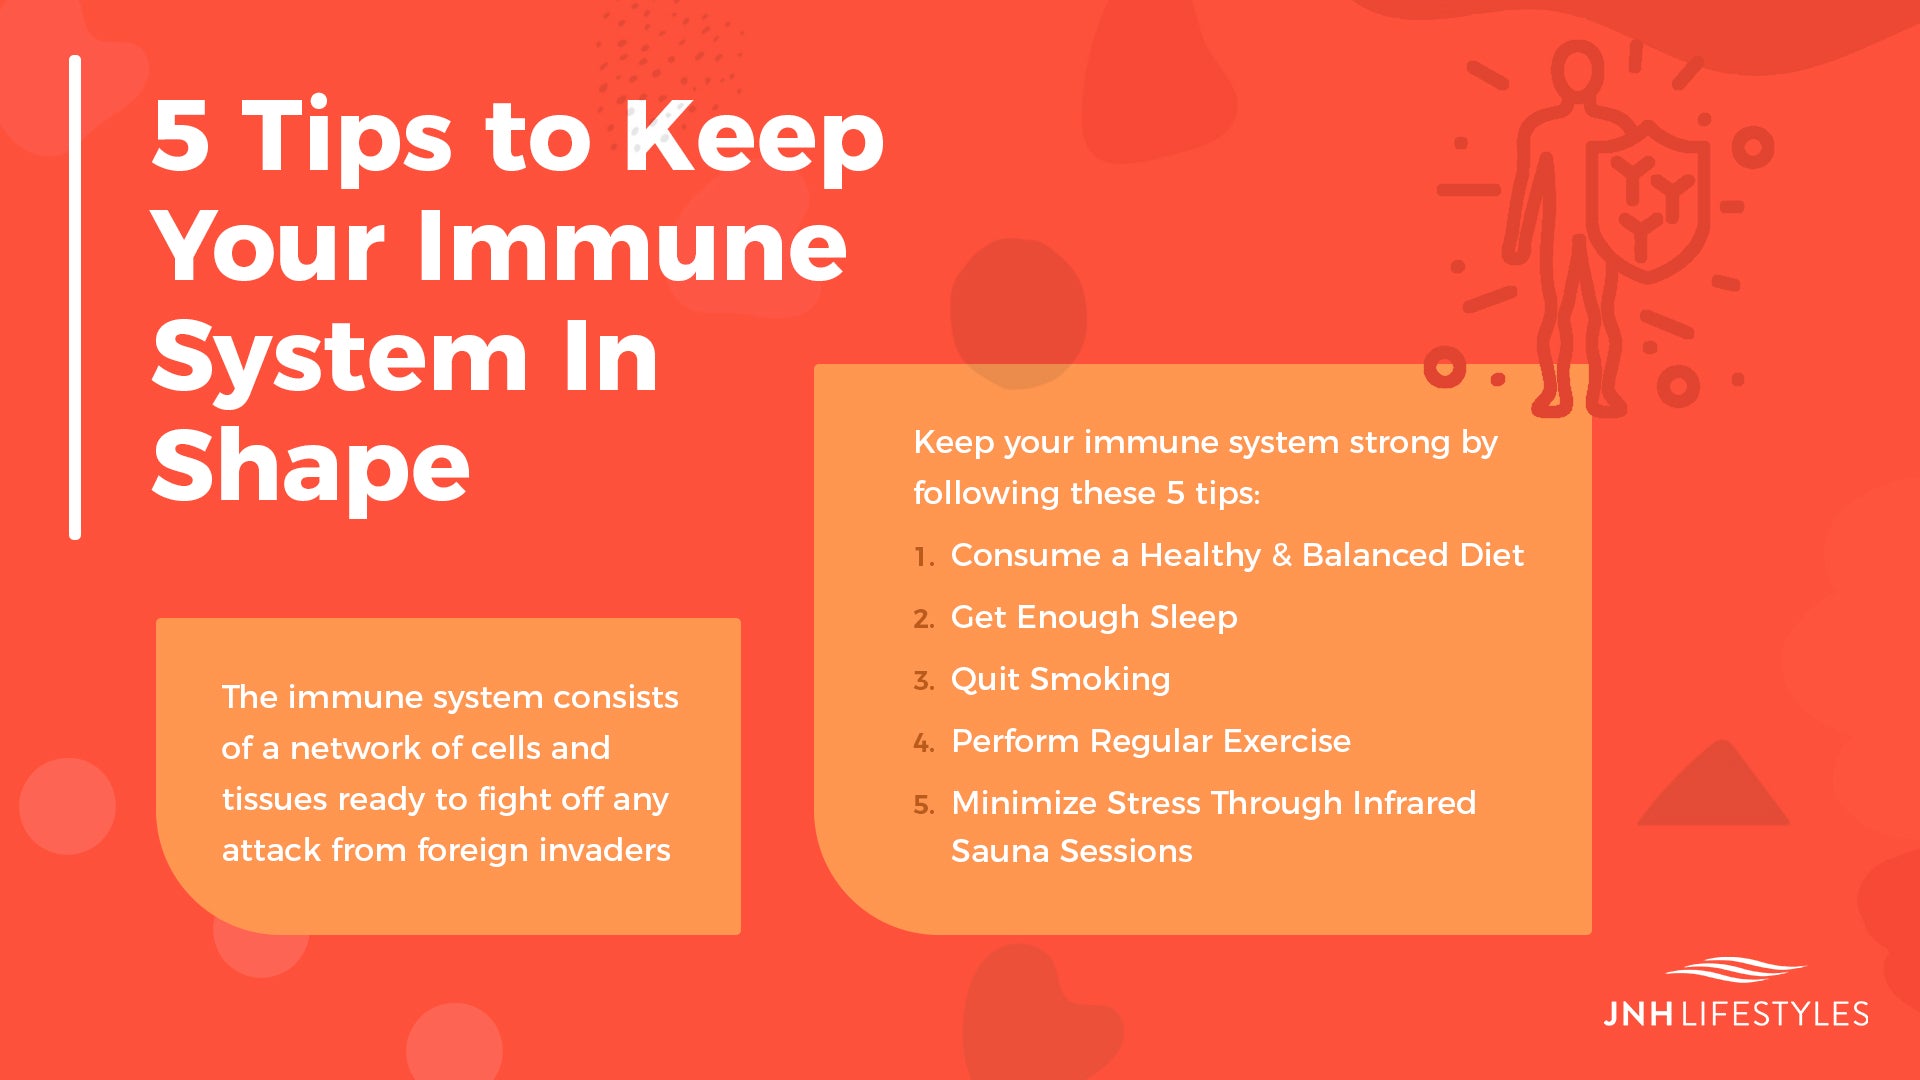 5 Tips to Keep Your Immune System In Shape -The immune system consists of a network of cells and tissues ready to fight off any attack from foreign invaders -Keep your immune system strong by following these 5 tips: 1. Consume a Healthy & Balanced Diet 2. Get Enough Sleep 3. Quit Smoking 4. Perform Regular Exercise 5. Minimize Stress Through Infrared Sauna Sessions